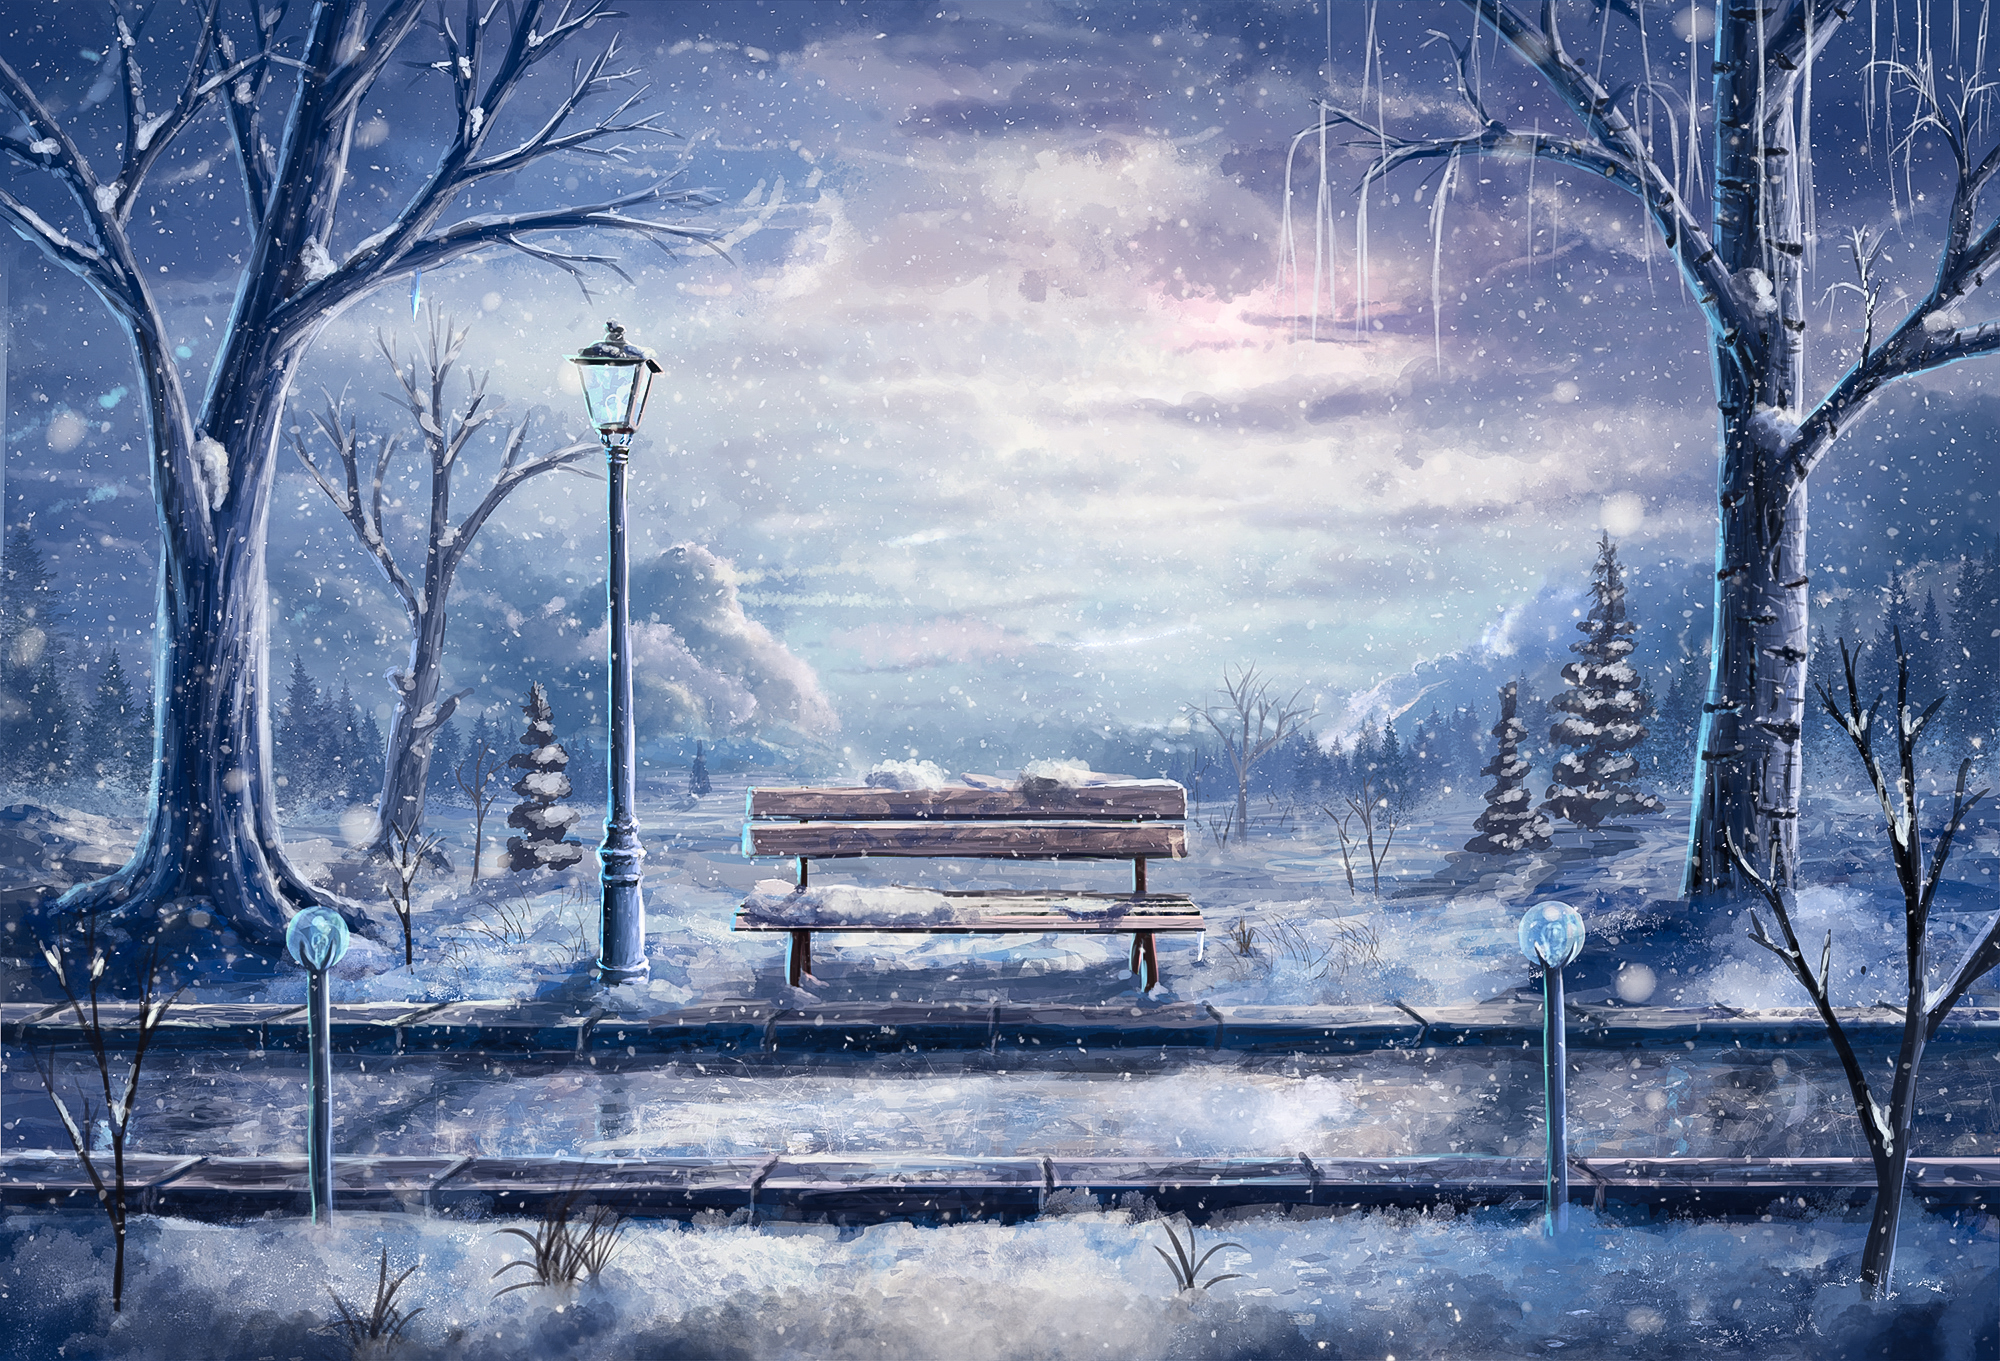 Snowy Bench in Park by Sylar113